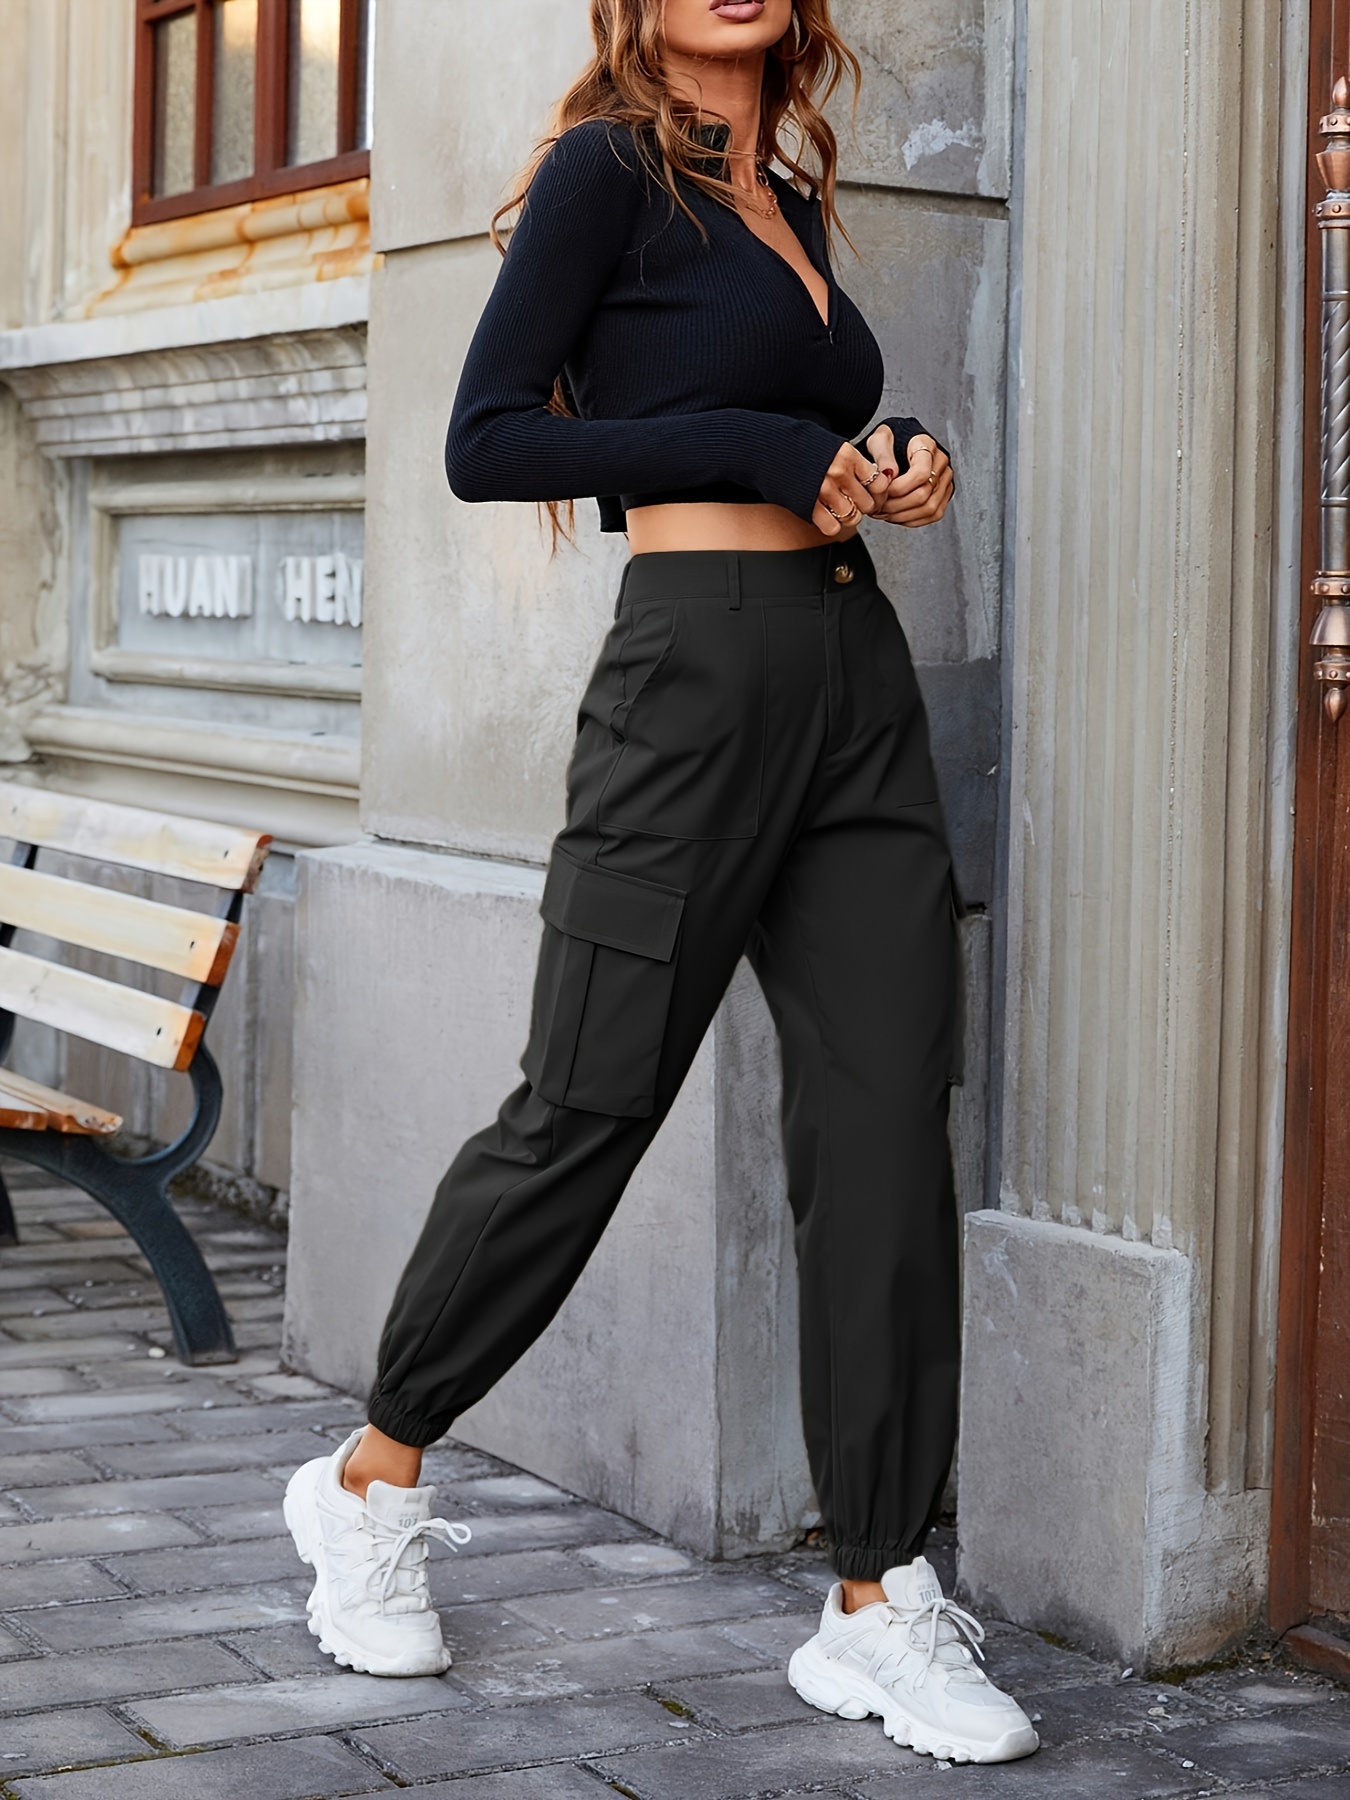 CHGBMOK Clearance Cargo Pants Women Fashion Casual Solid Color